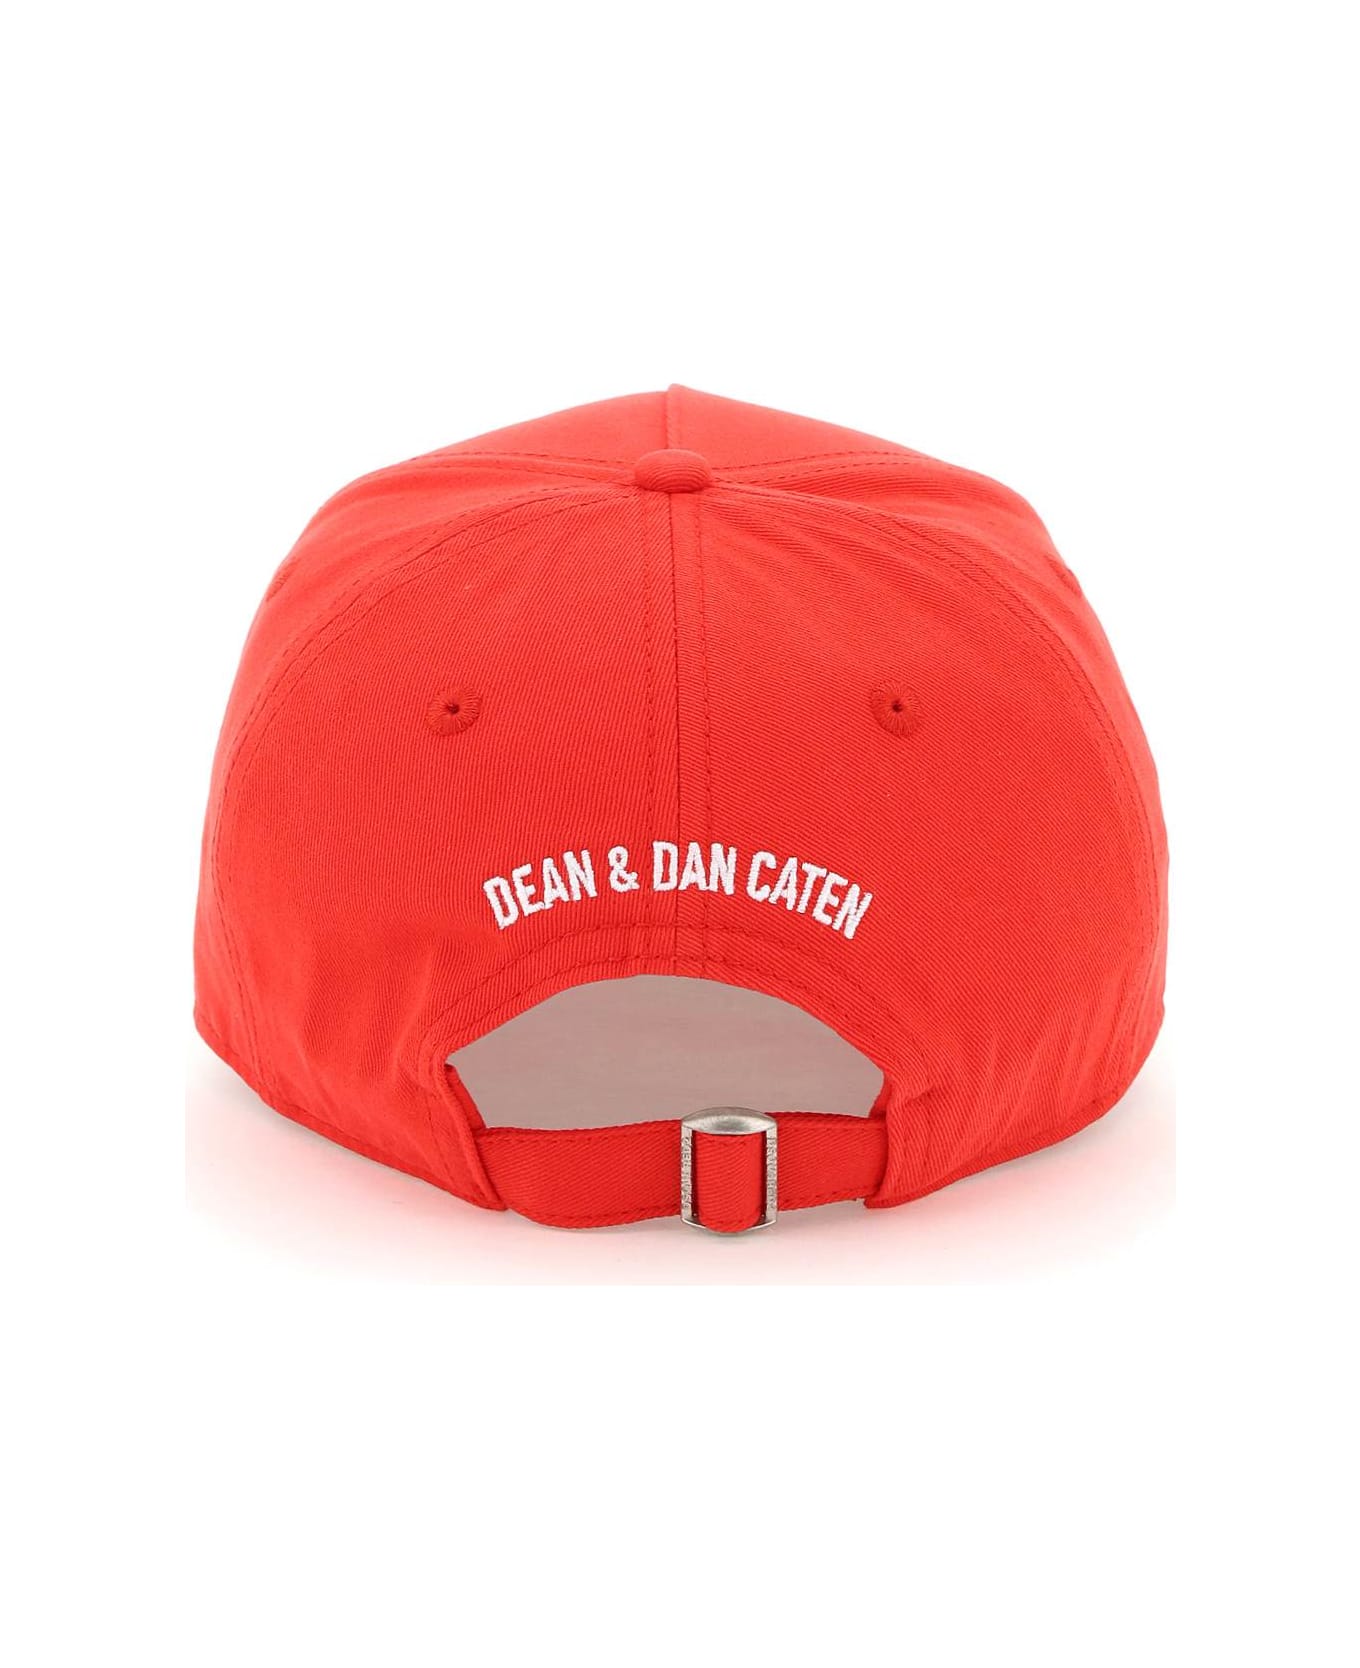 Dsquared2 Be Icon Baseball Cap - red